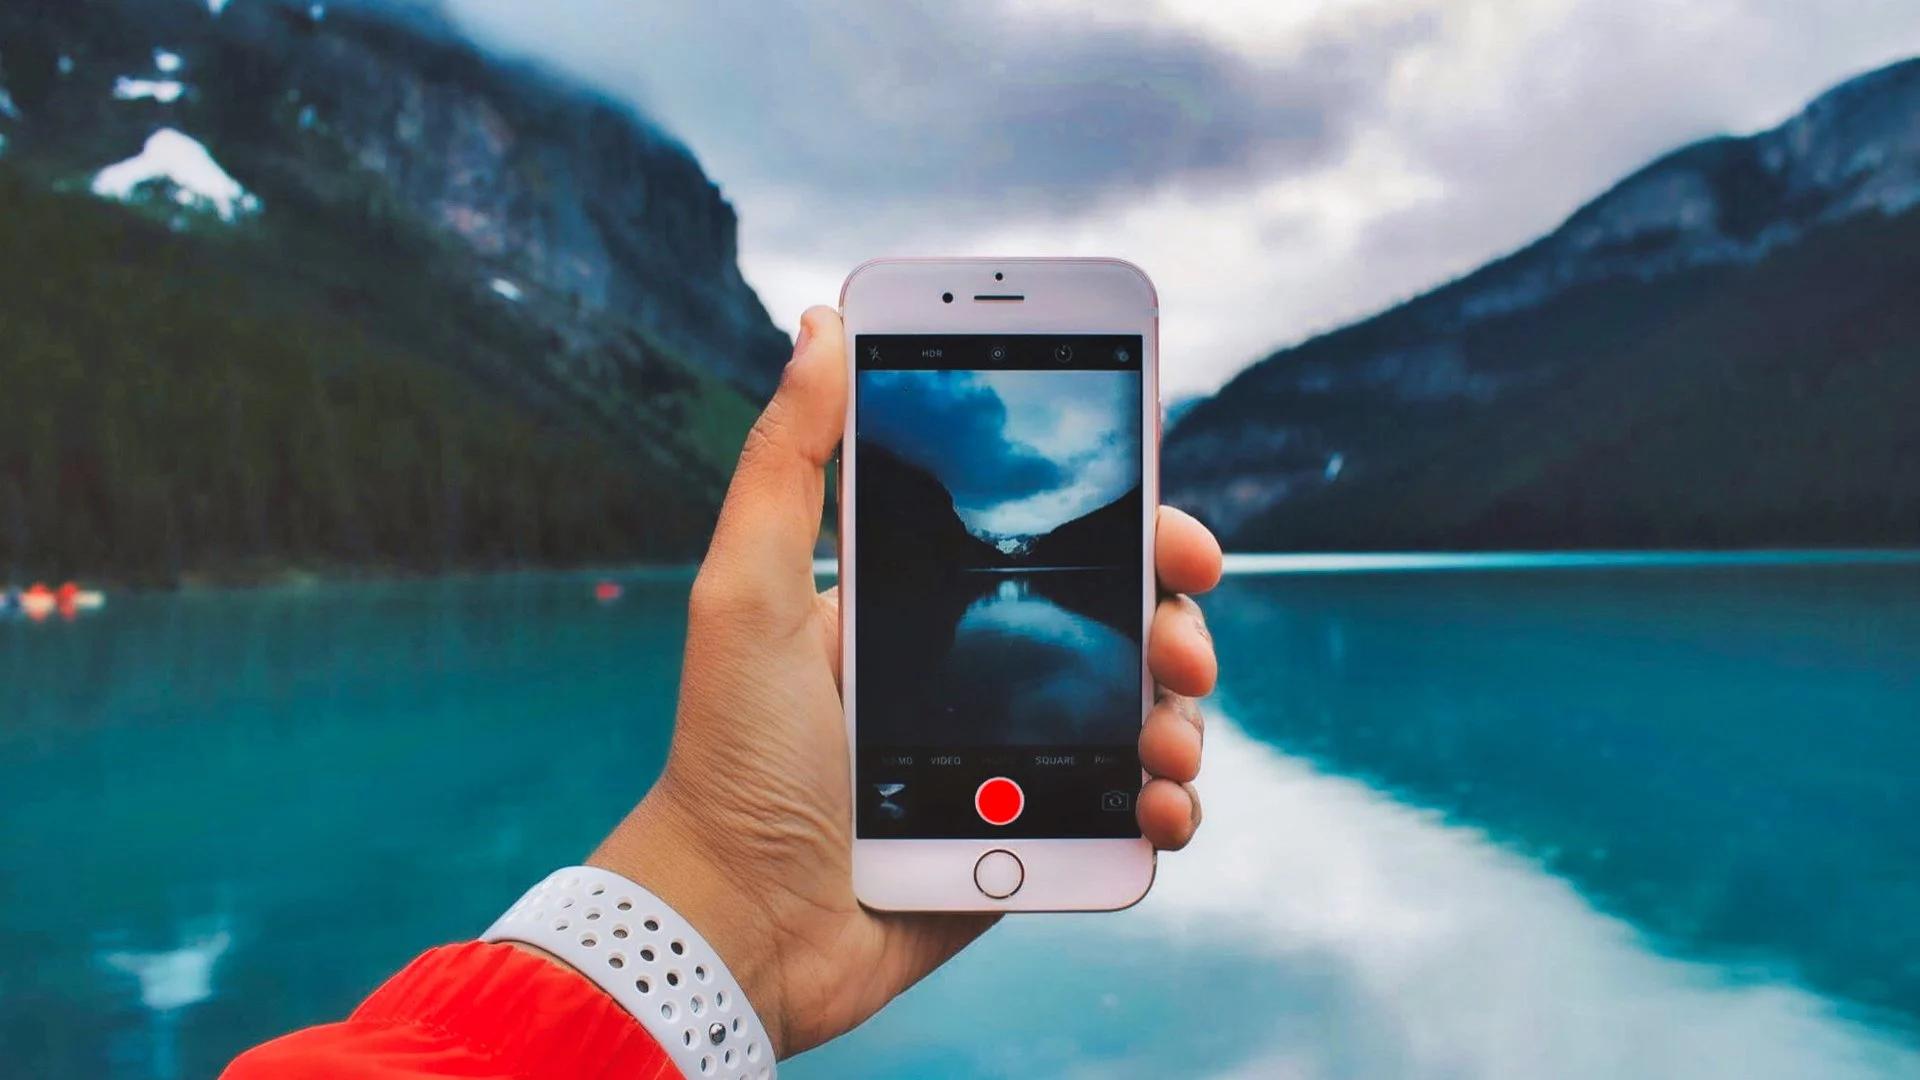 Smartphone Videography Masterclass: Making the Most out of your Smartphone’s Camera